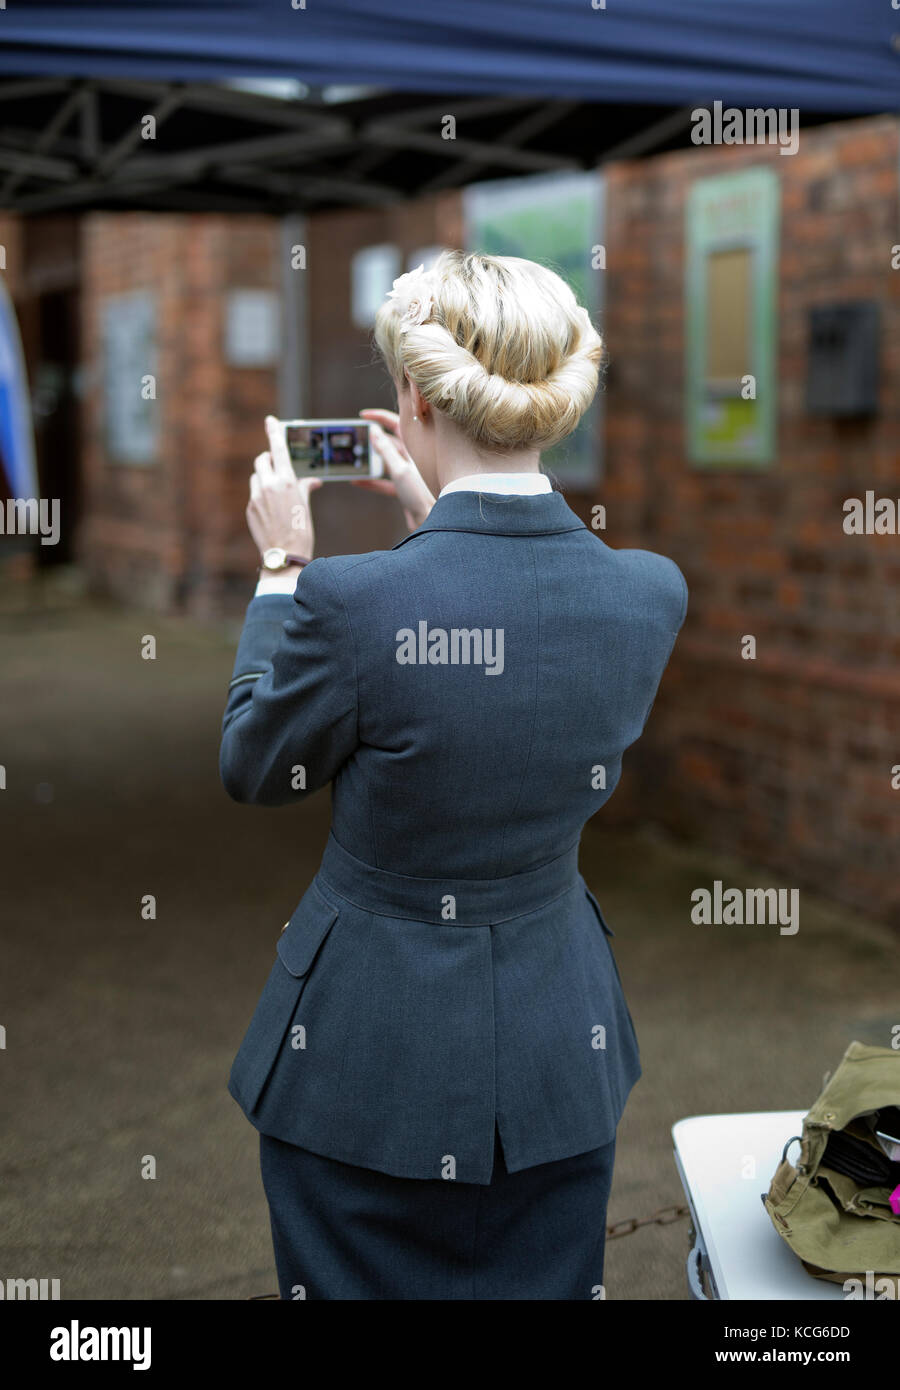 YOUNG WOMEN IN 1940'S VINTAGE RAF UNIFORM TAKING A PHOTO WITH A MOBILE PHONE, UK,2017 Stock Photo